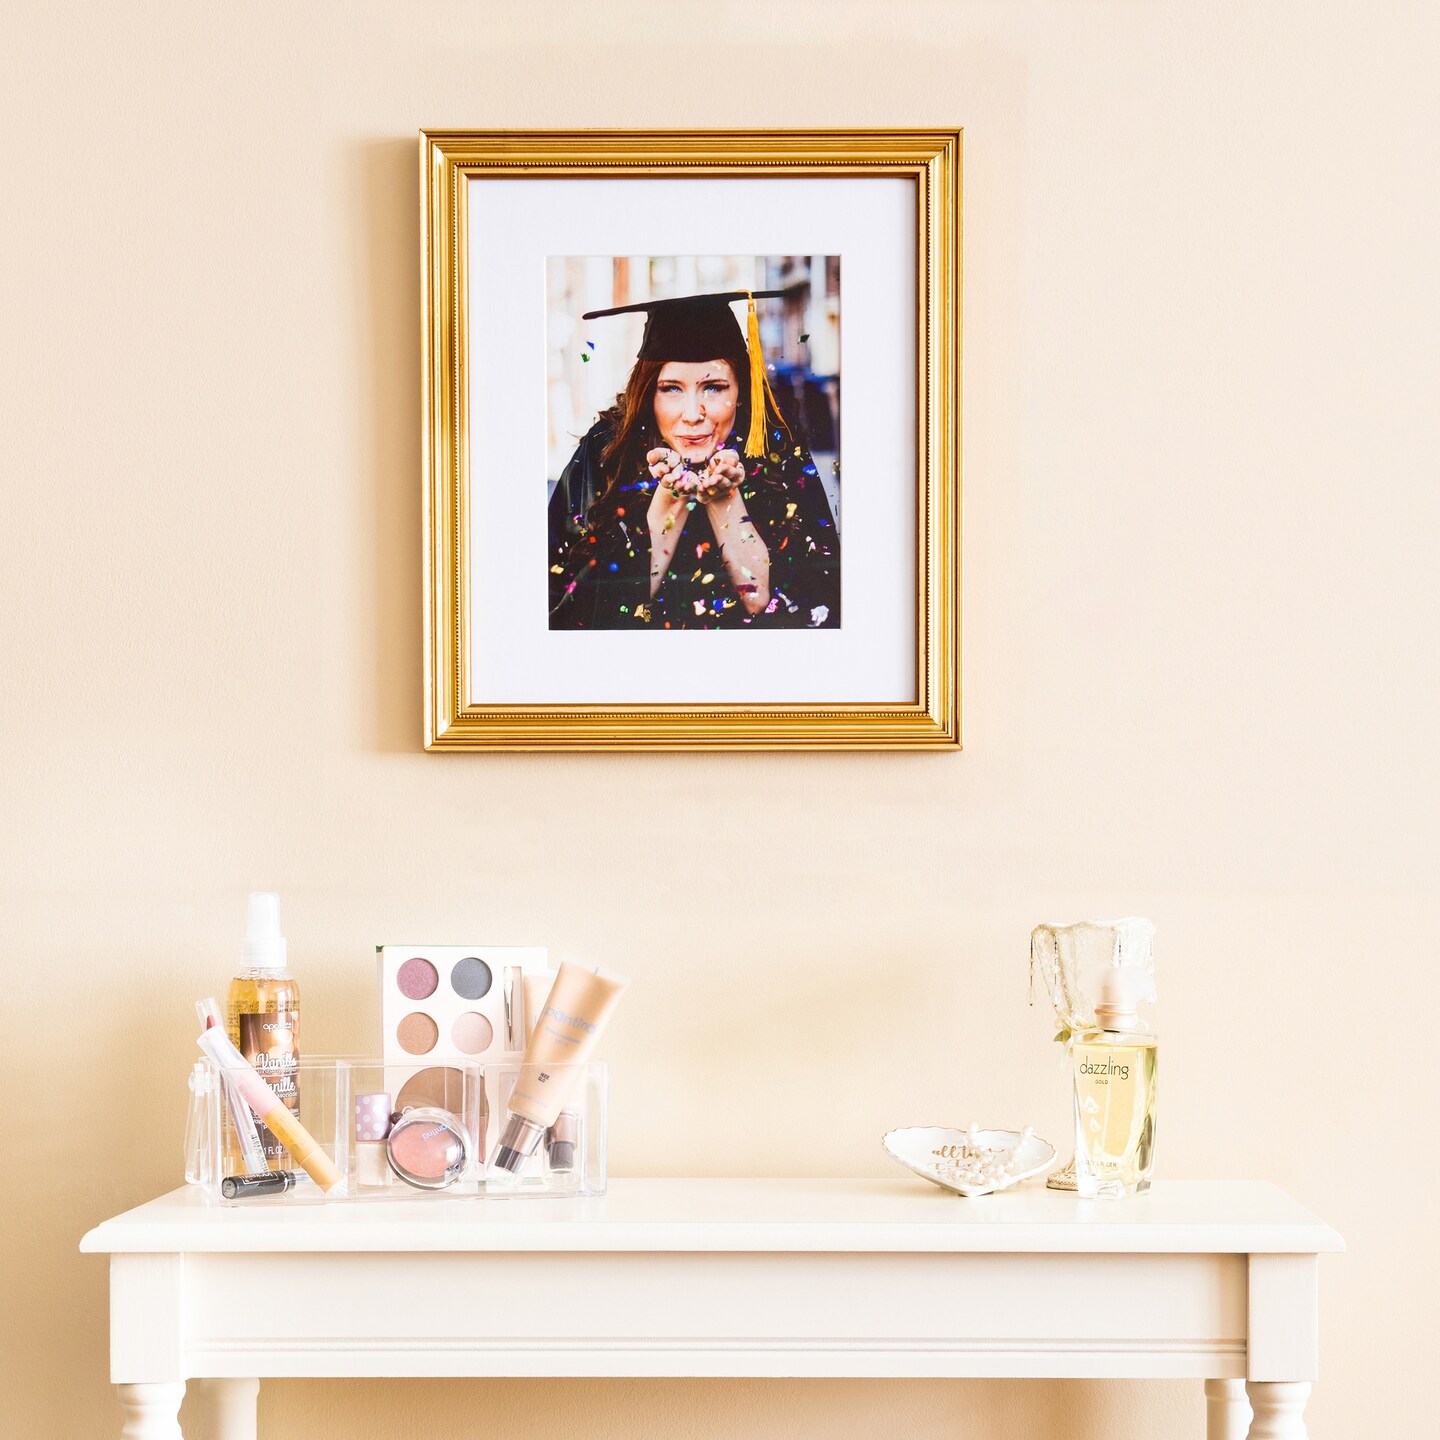 ArtToFrames 16x24 Inch  Picture Frame, This 1.25 Inch Custom Wood Poster Frame is Available in Multiple Colors, Great for Your Art or Photos - Comes with 060 Plexi Glass and  Corrugated Backing (A17MA)